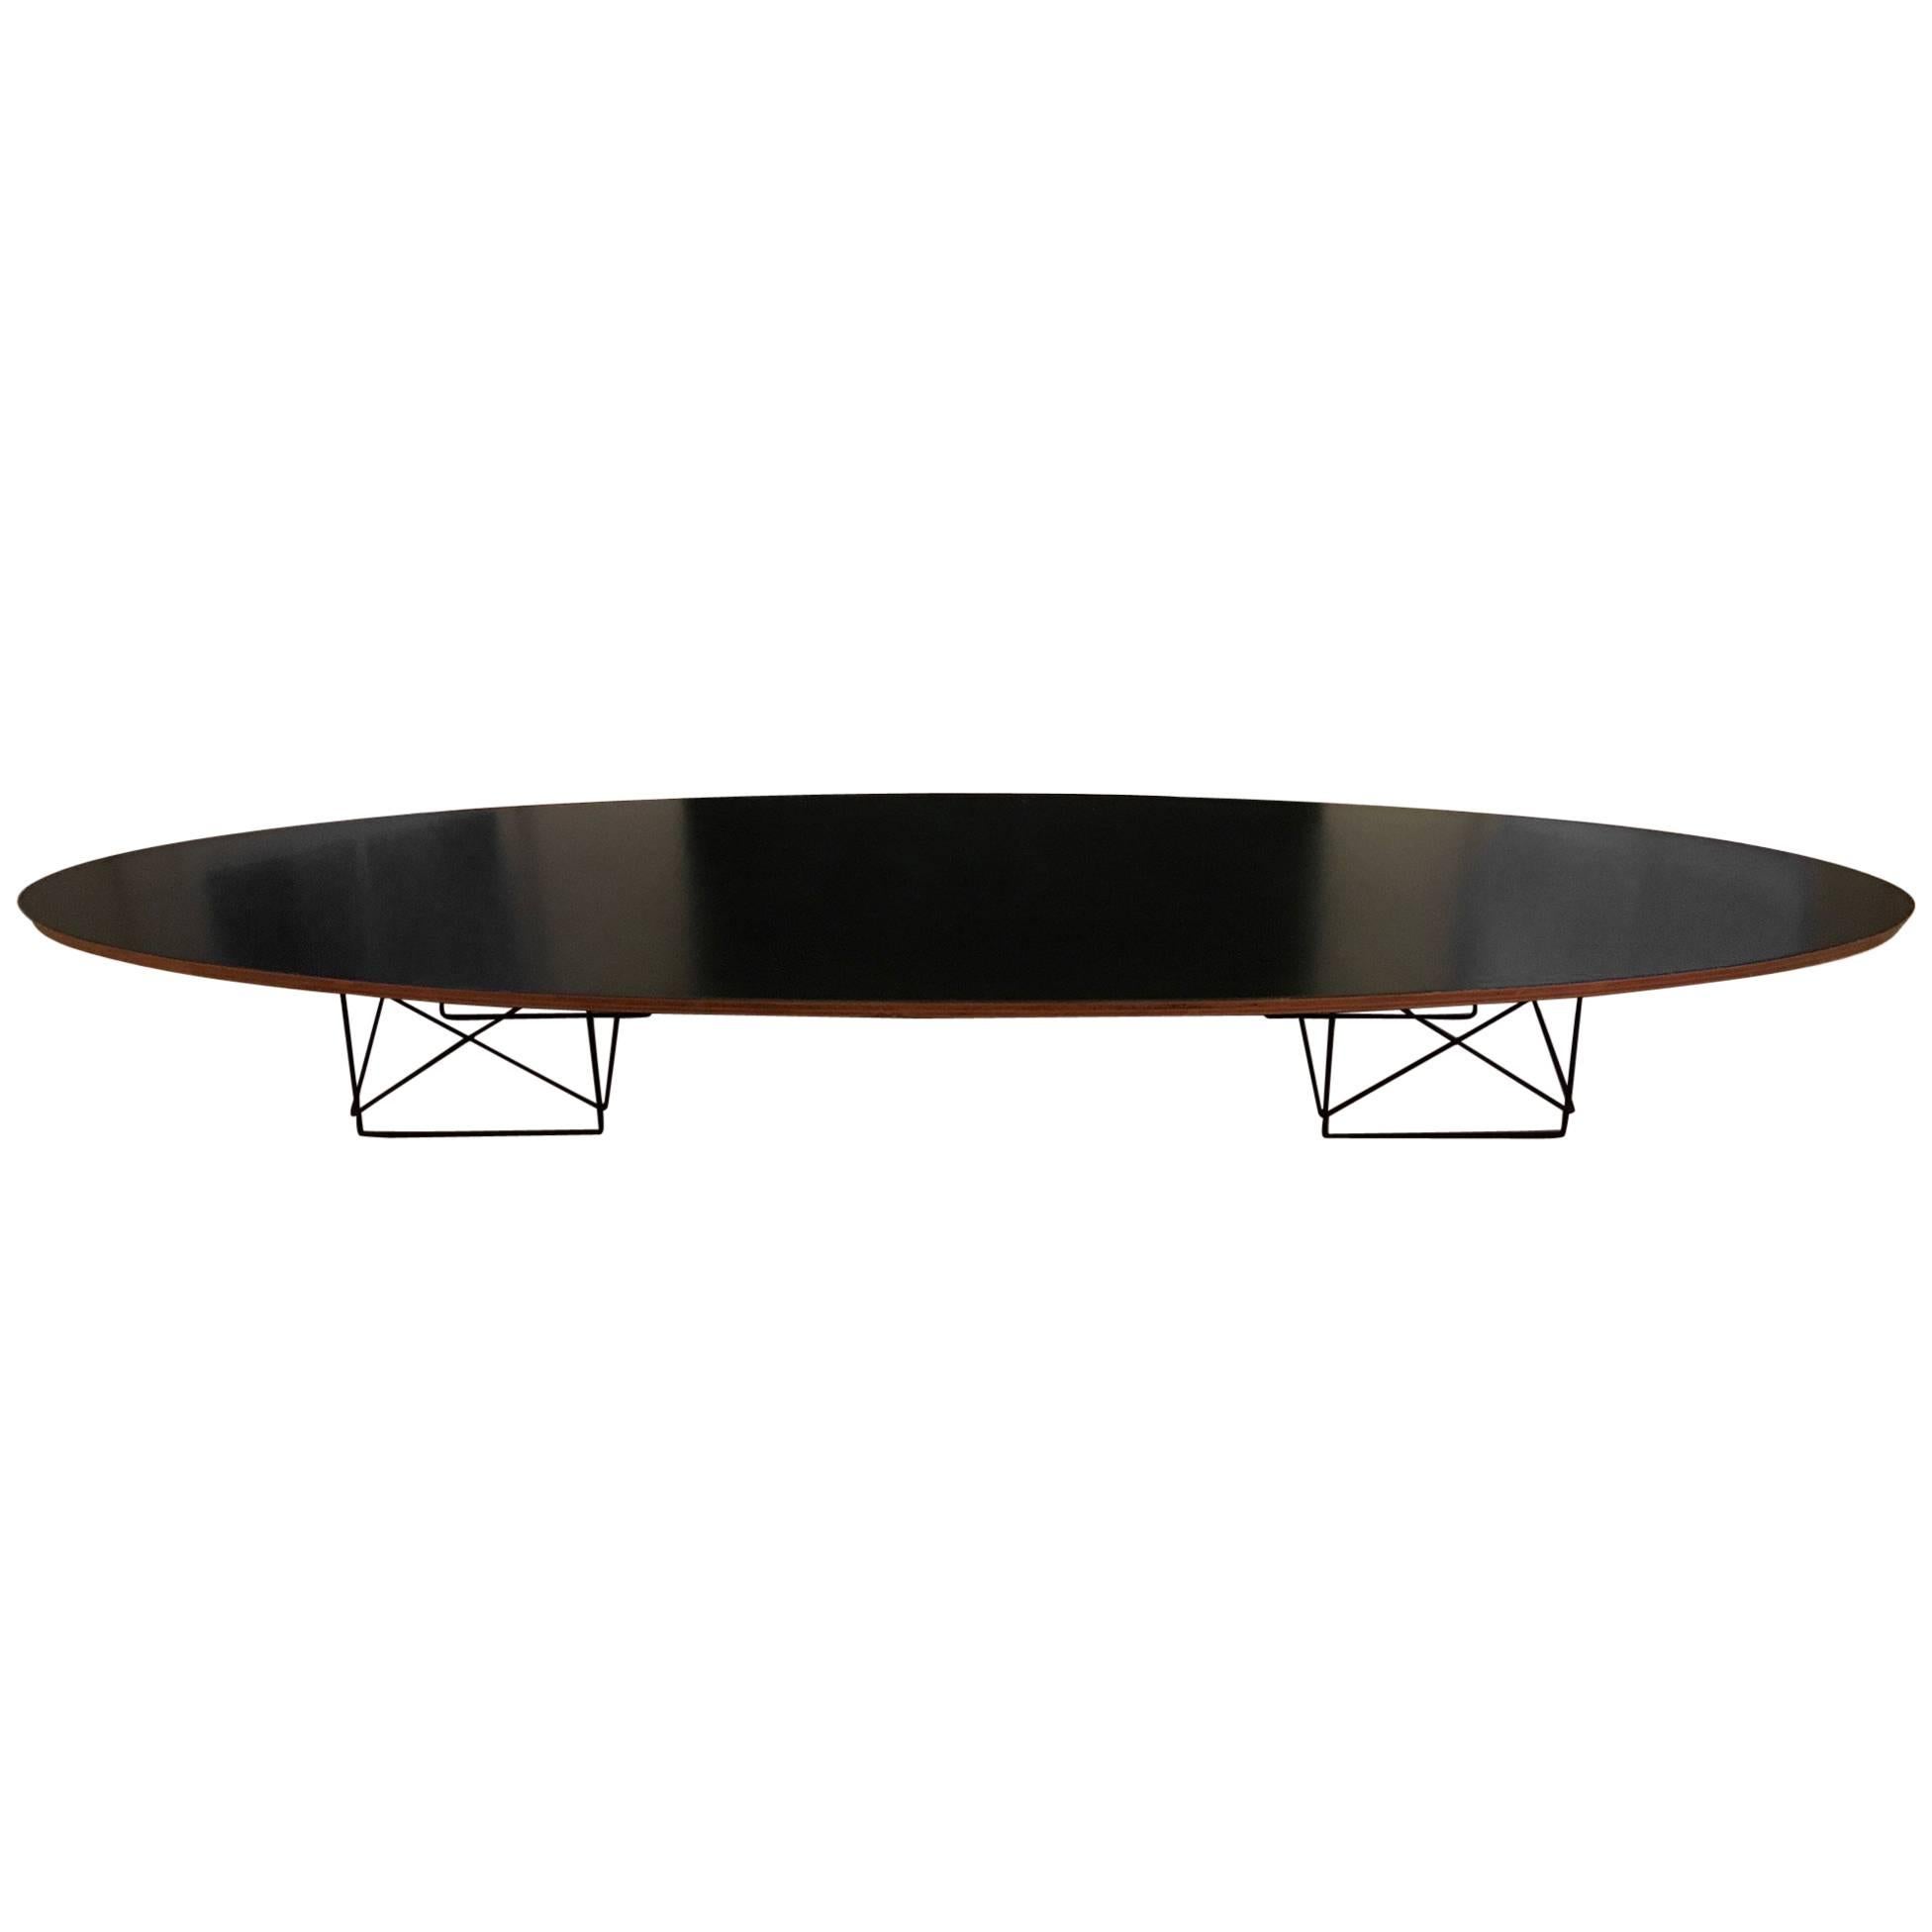 Eames "Surfboard" Cocktail Table with Elliptical Rod Base